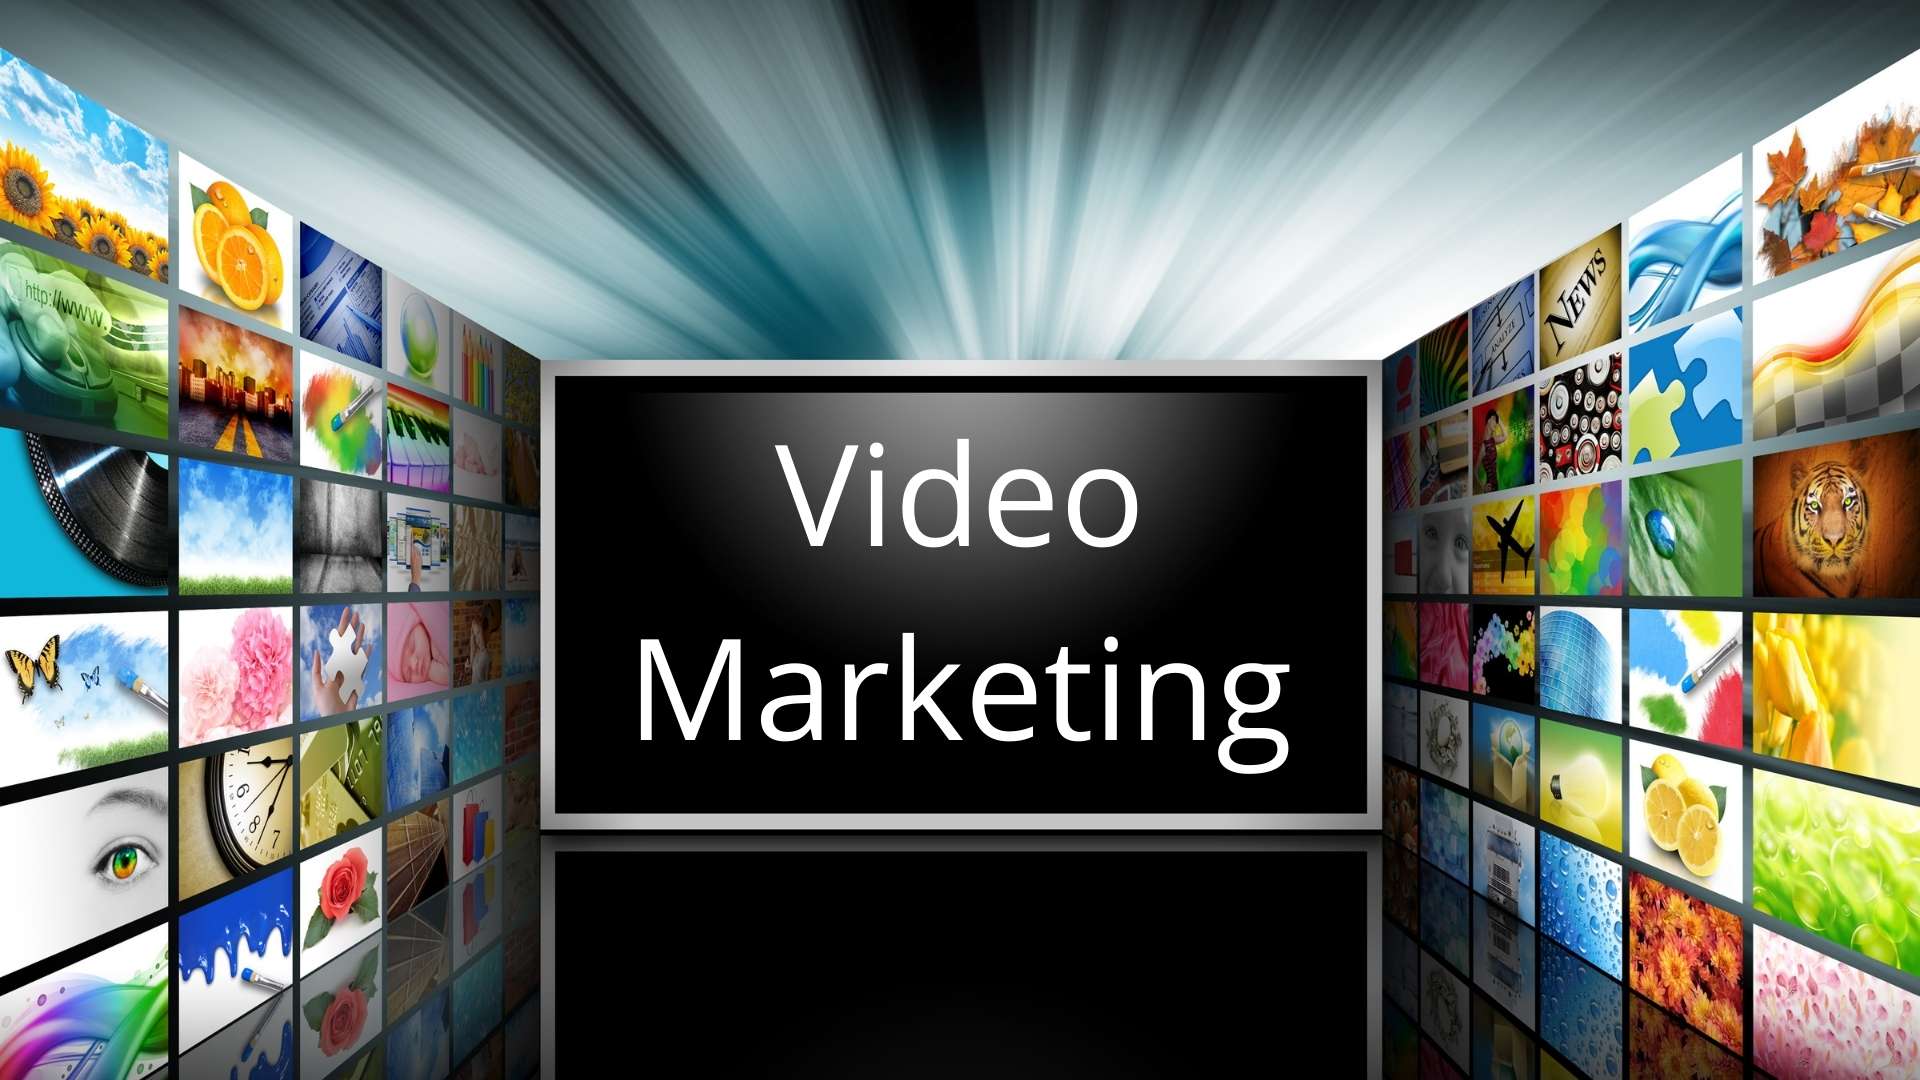 A complete guide to Video Marketing